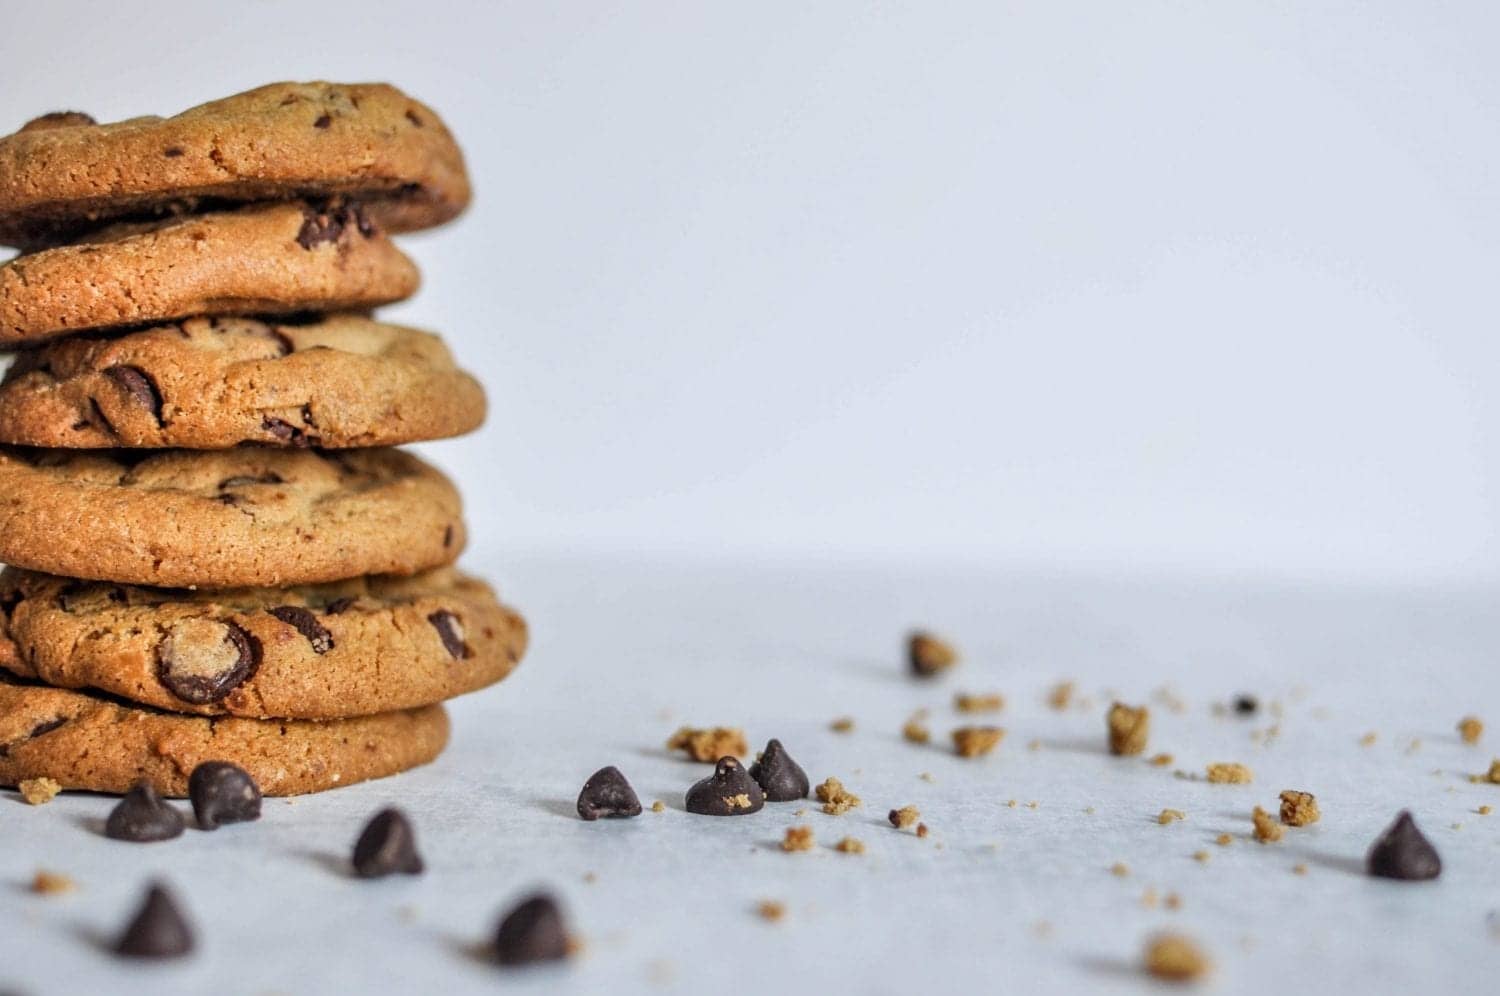 Stack of 6 weed cookies on a white table with chocolate chips